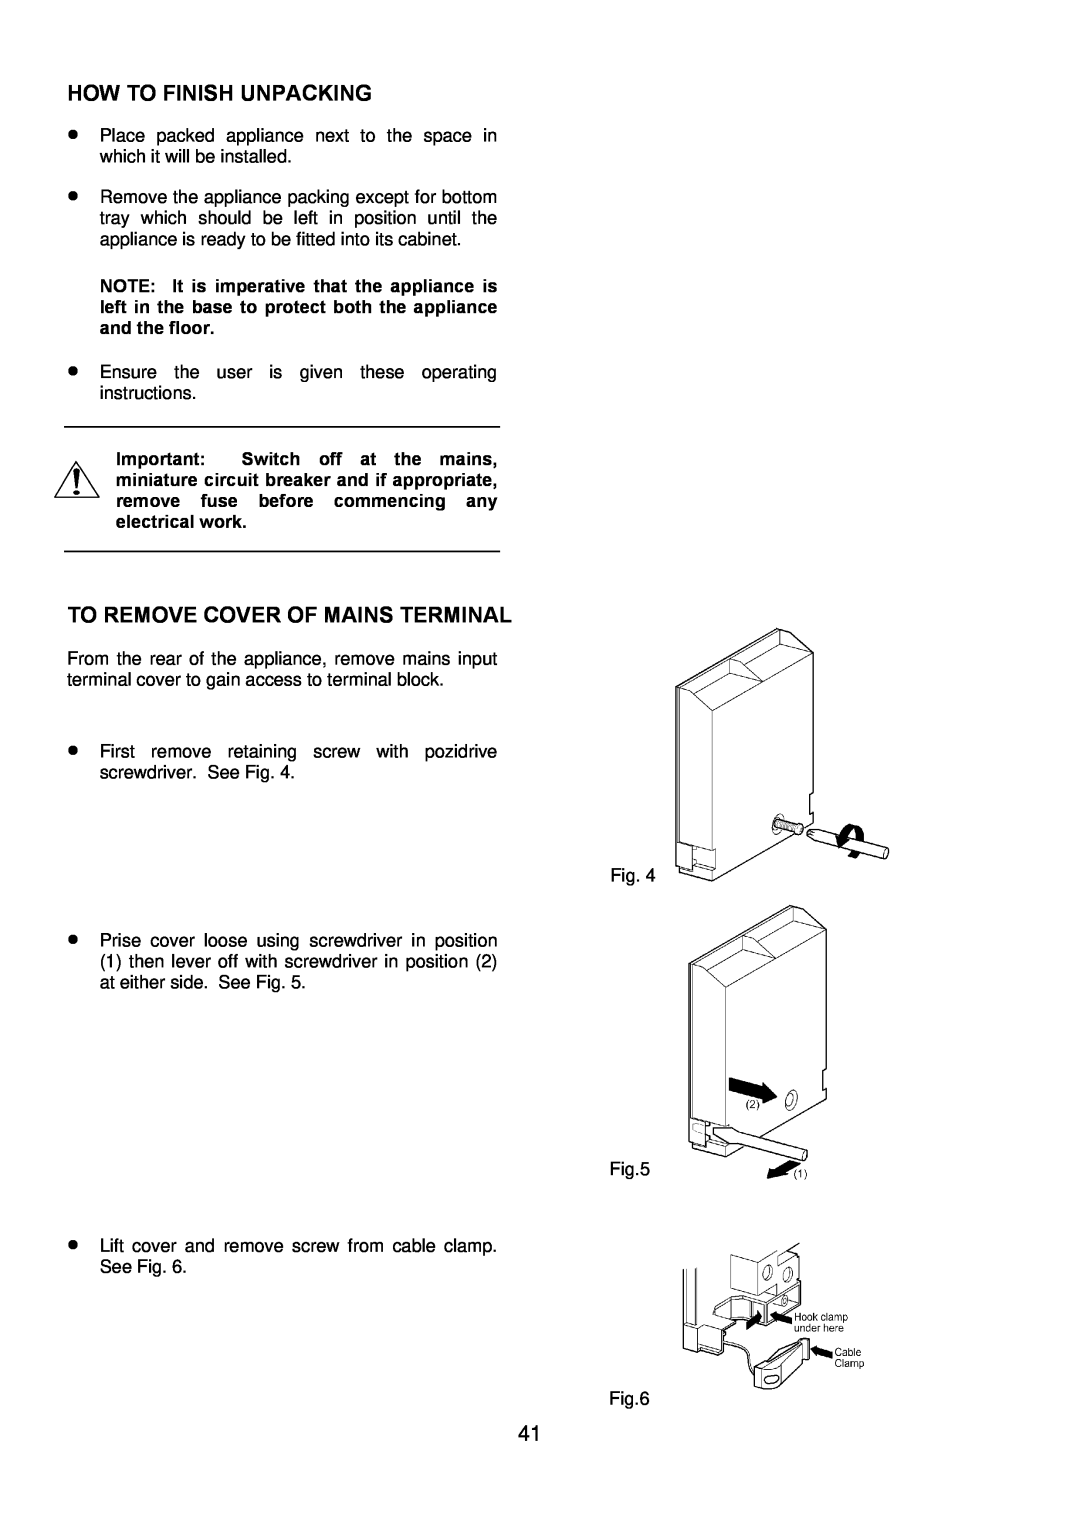 Electrolux D4101-5 manual How To Finish Unpacking, To Remove Cover Of Mains Terminal 